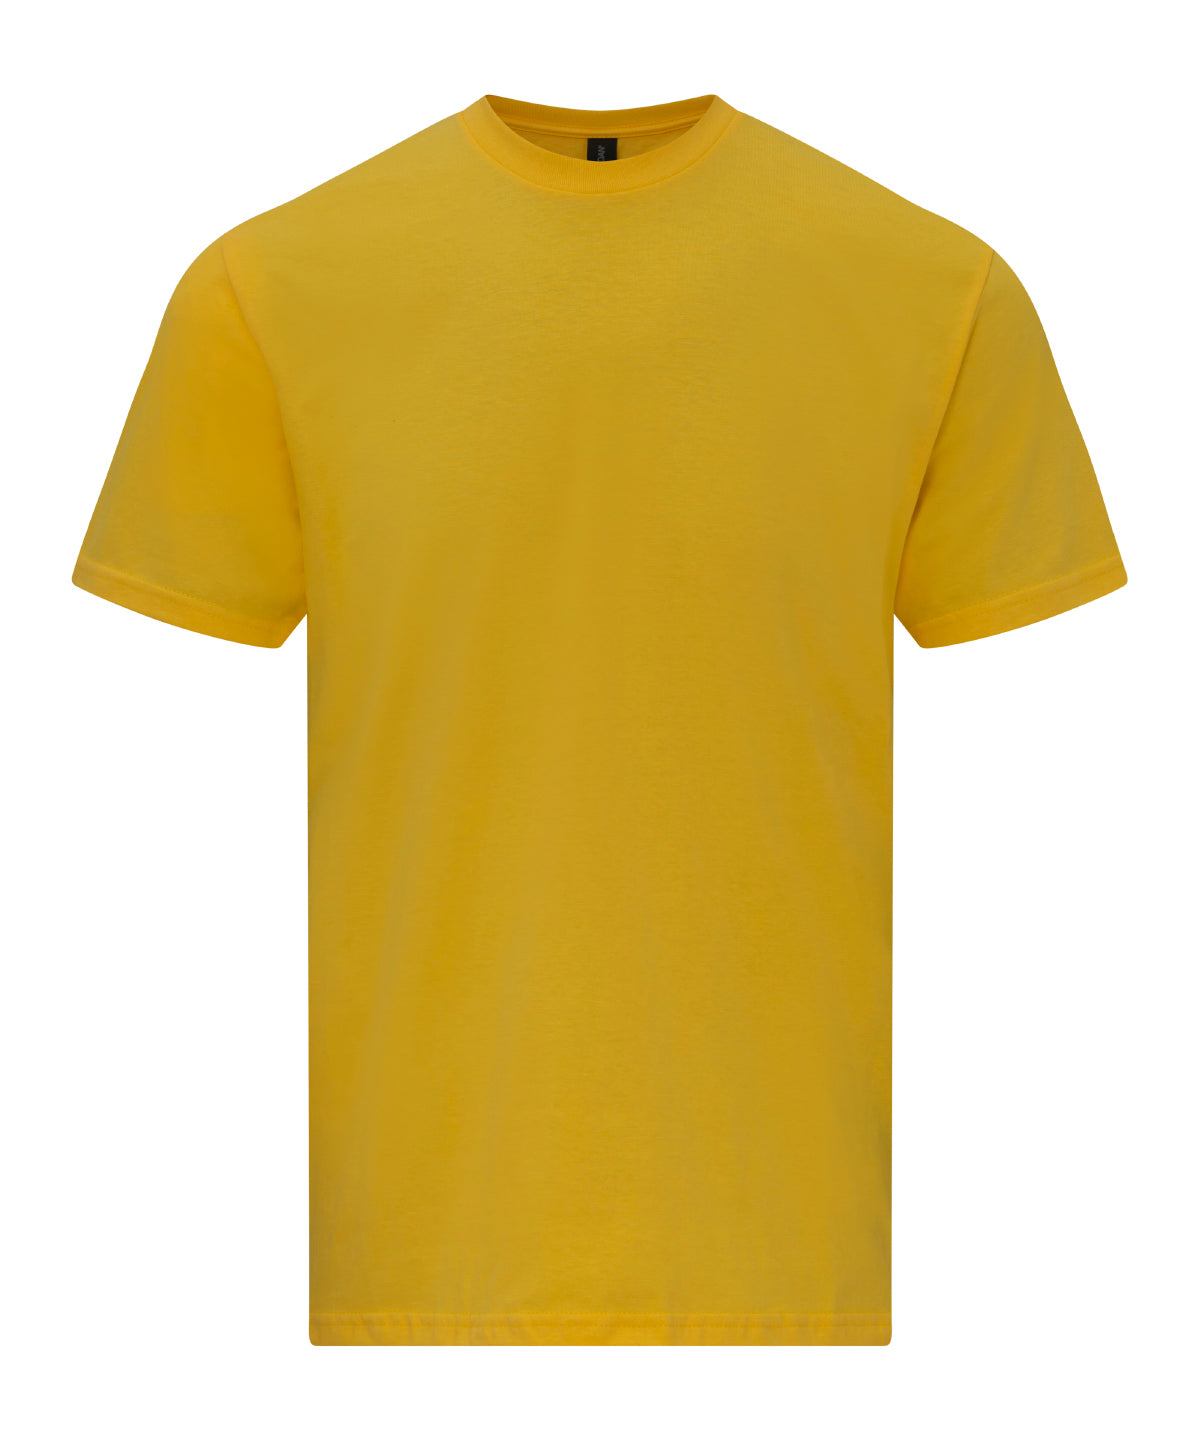 Softstyle™ midweight adult t-shirt